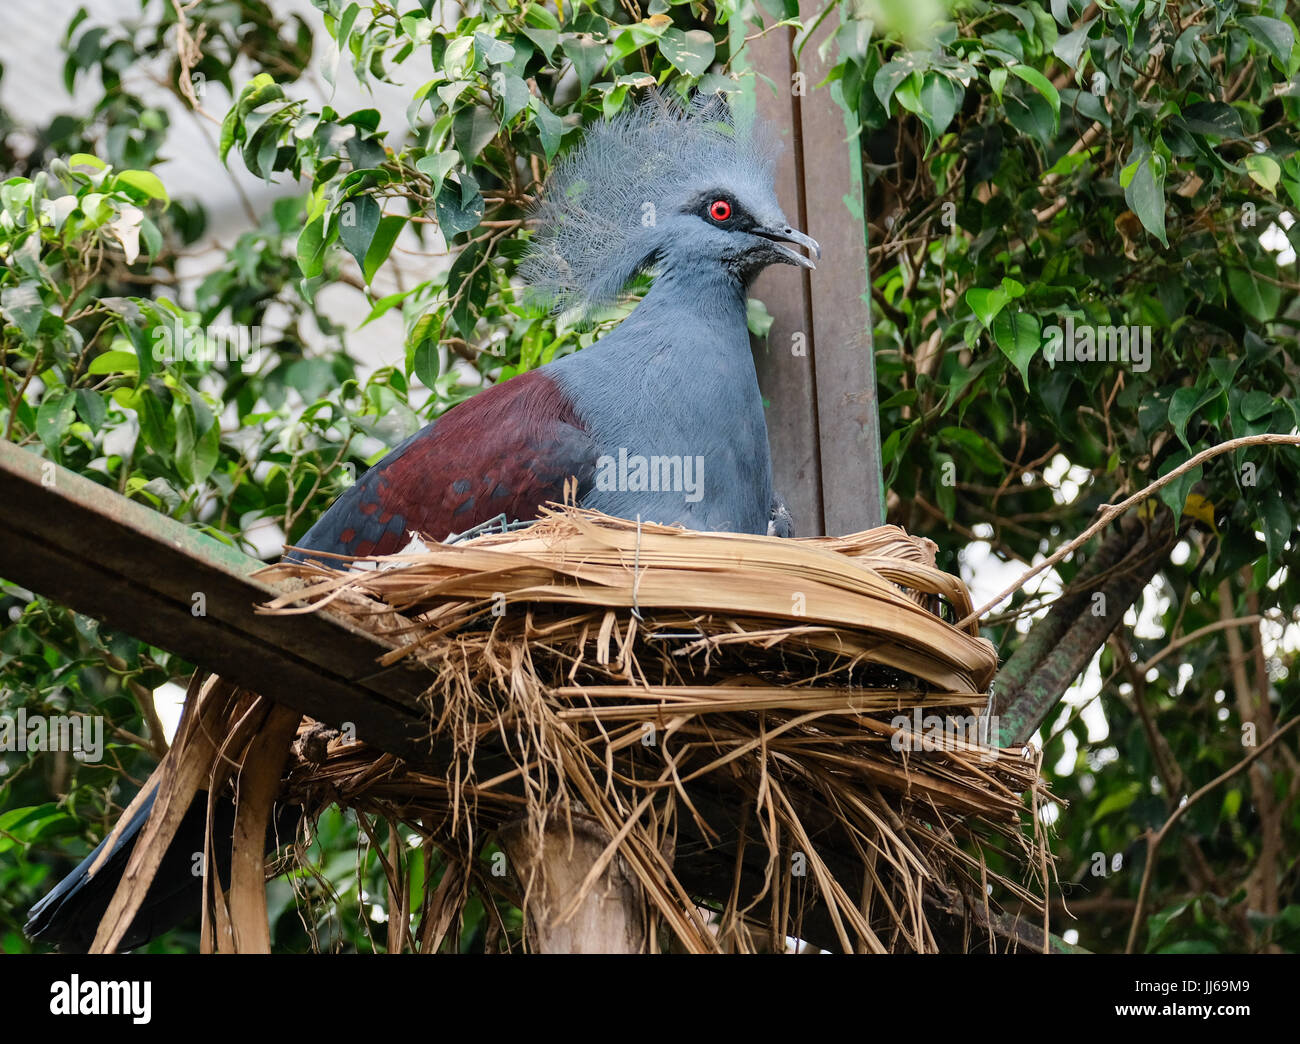 FUENGIROLA, ANDALUCIA/SPAIN - JULY 4 : Southern Crowned Pigeon (Goura scheepmakeri sclateri) at the Bioparc Fuengirola Costa del Sol Spain on July 4, 2017 Stock Photo